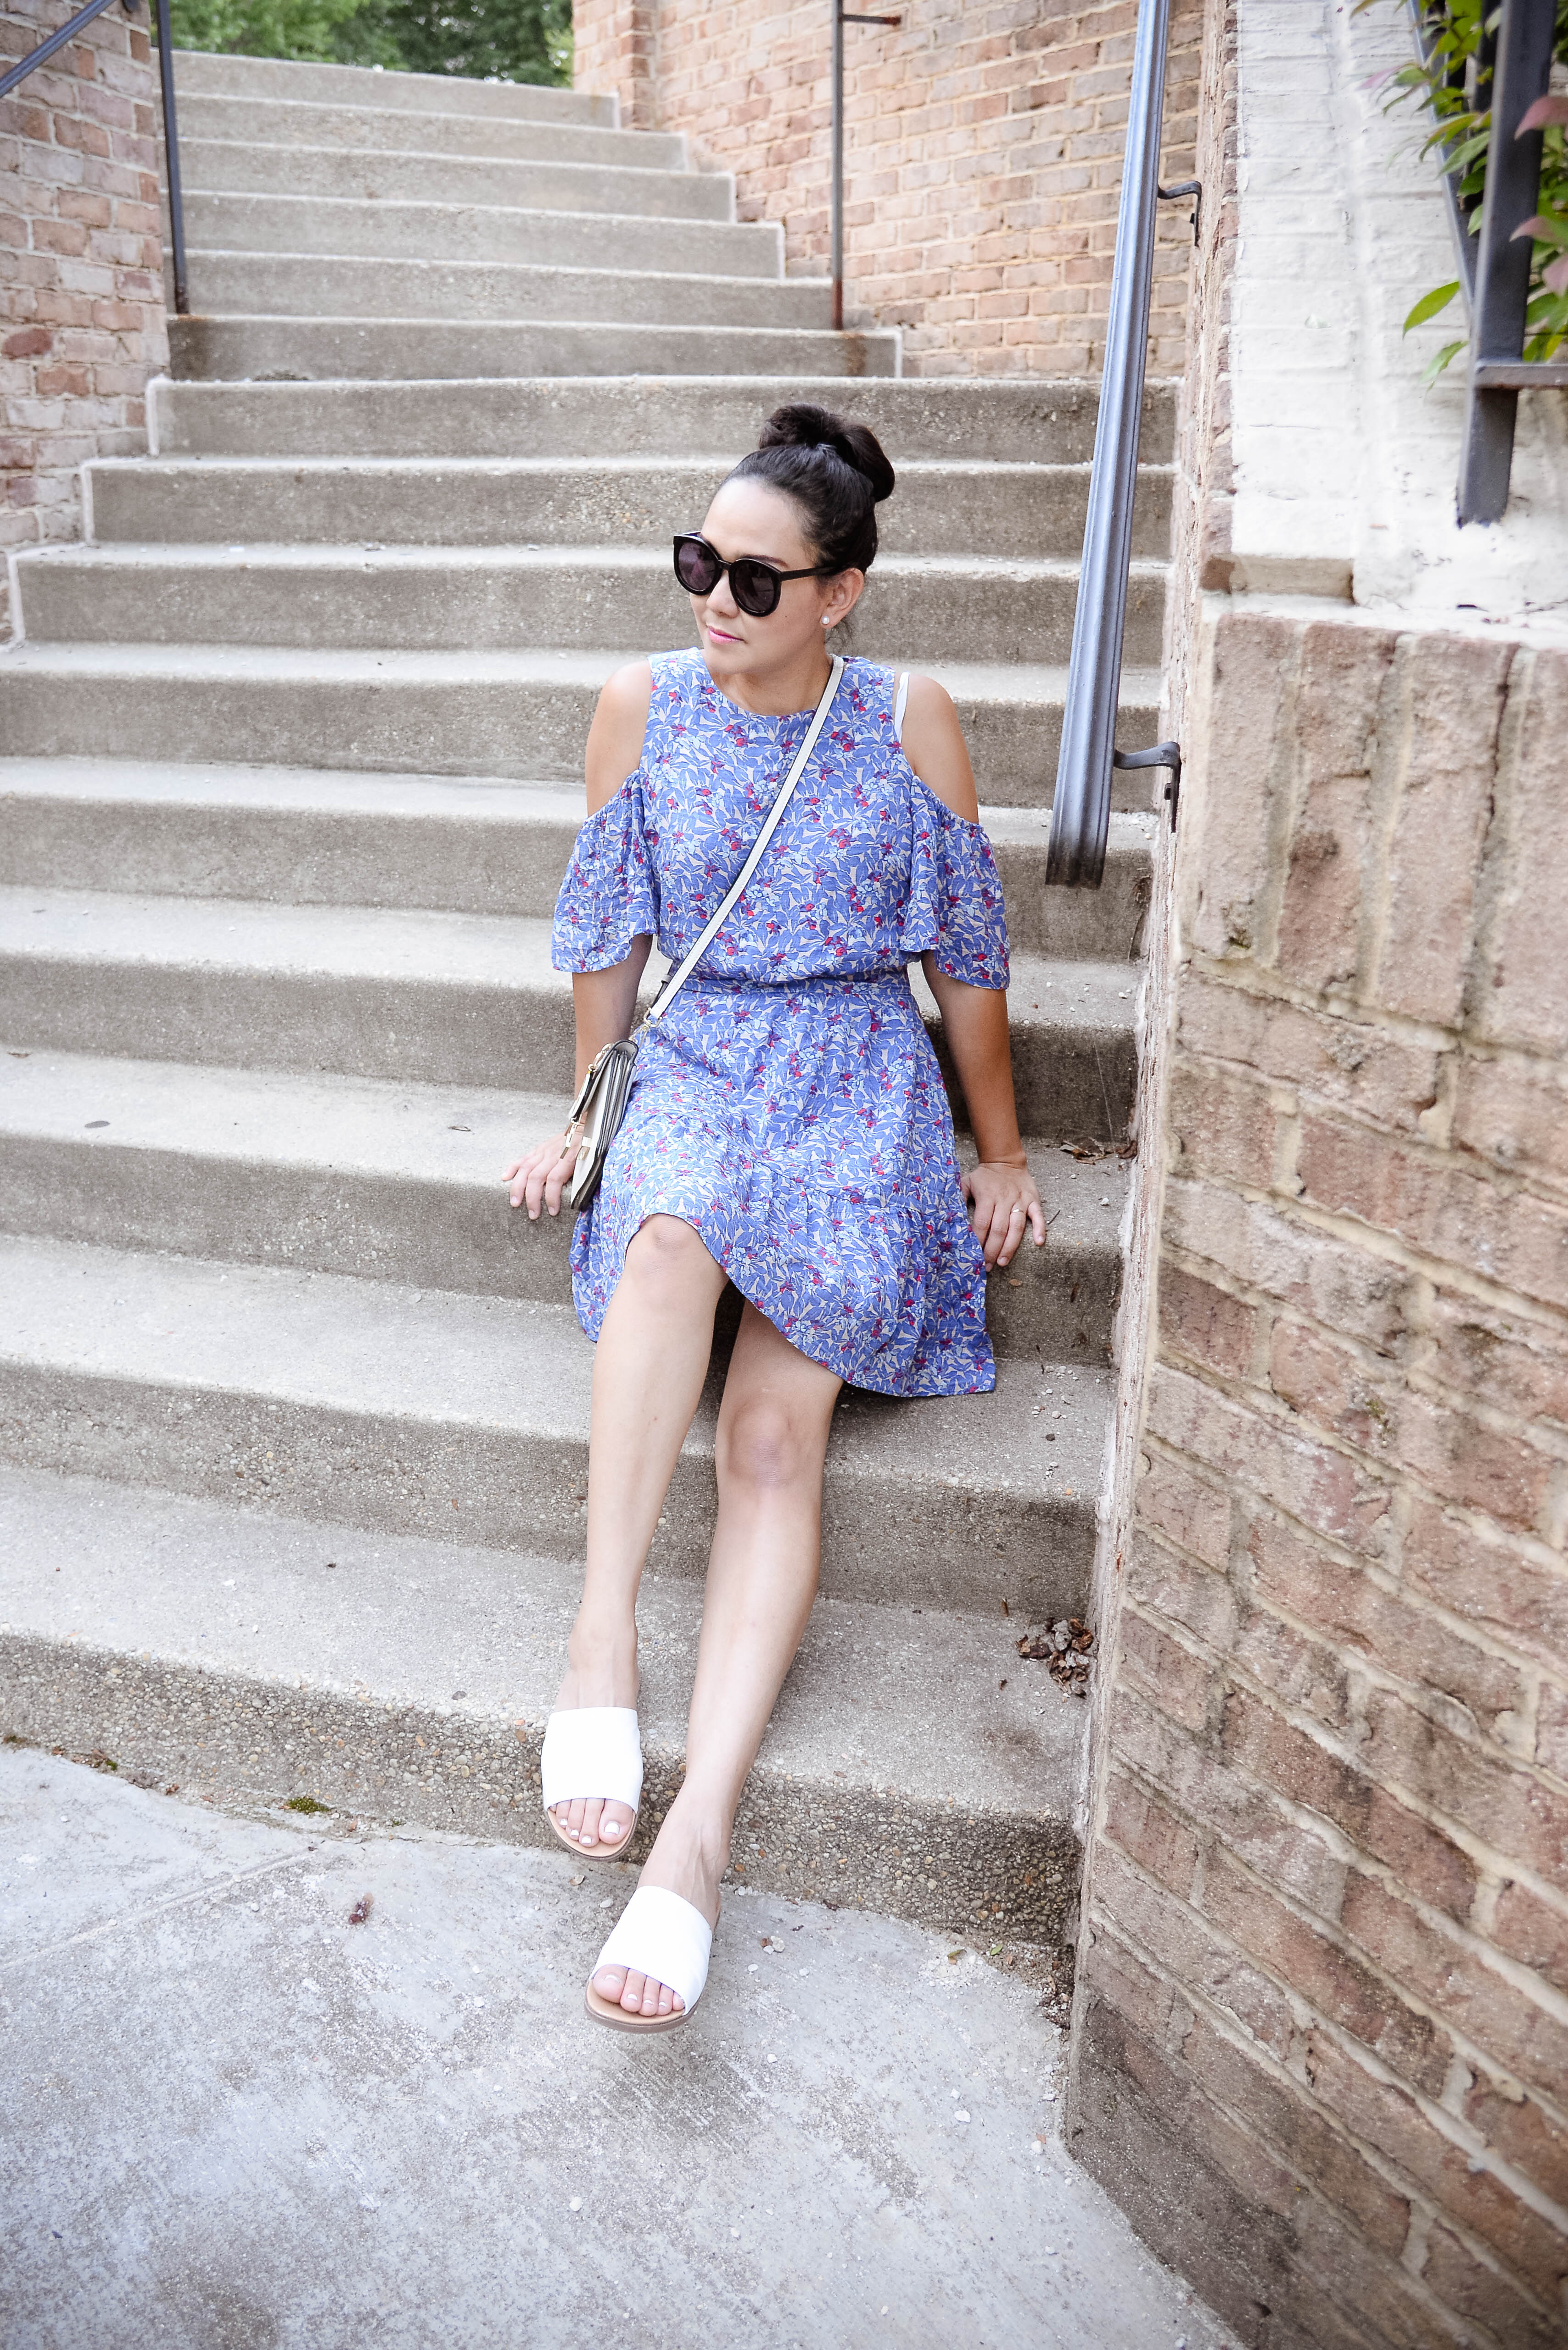 How To Style A Blue Dress for Summer